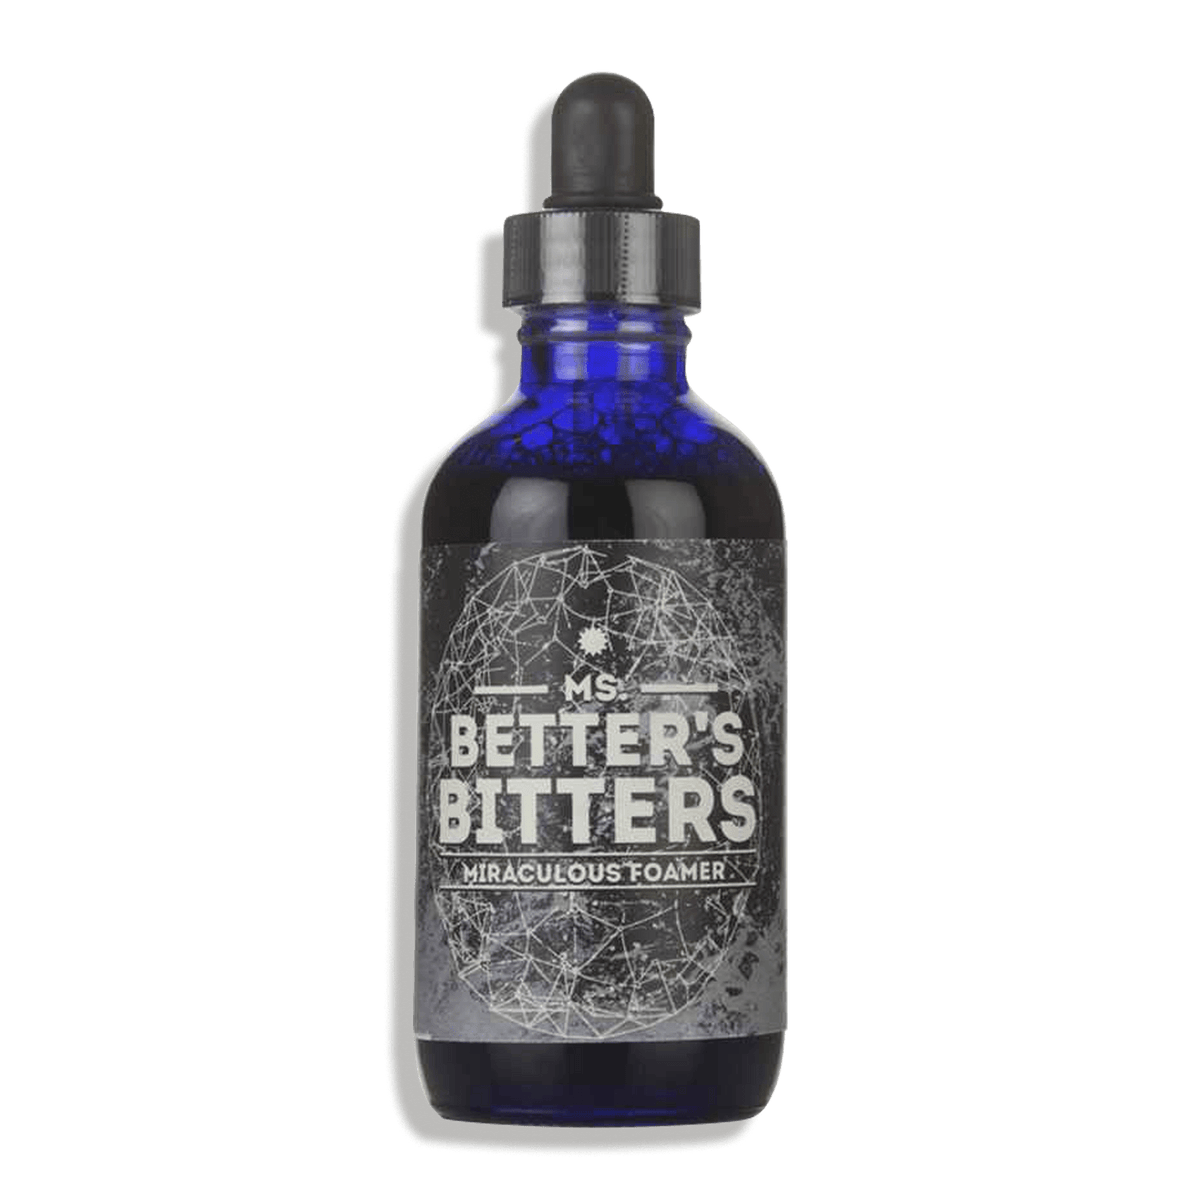 Edible Cocktail Toppers Accessories Ms Better’s Bitters, Miraculous Foamer – 120ml